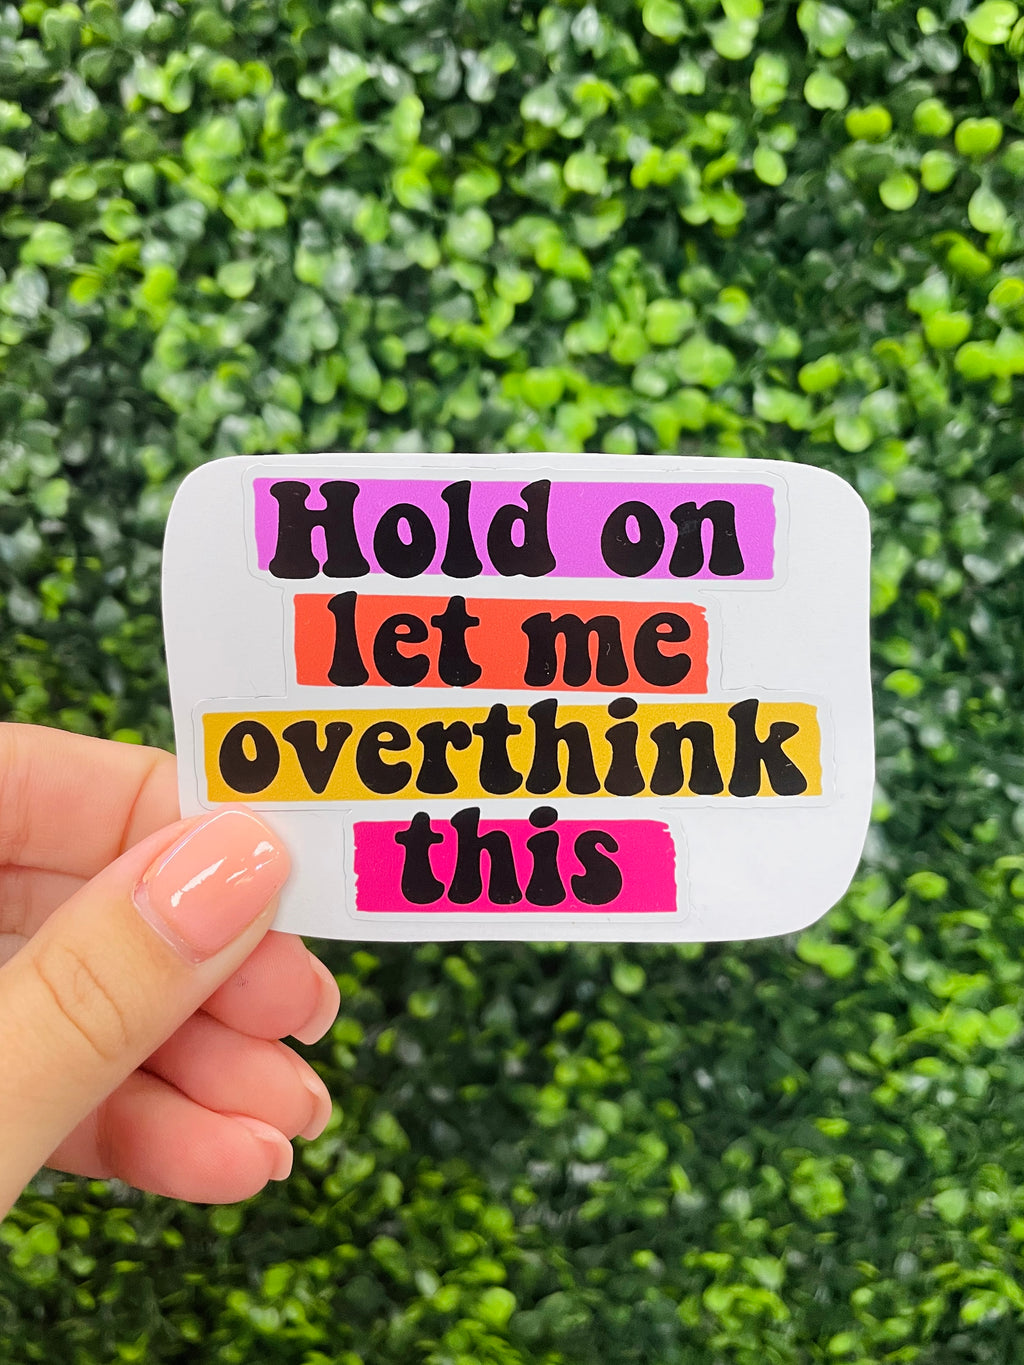 This Hold On Let Me Overthink This Sticker is a must-have for any overthinker! Show the world your sense of humor with this quirky sticker - perfect for sticking onto your laptop or sippin' cup. Go ahead, take a moment to ponder this one. Hold on, let ME overthink this!!